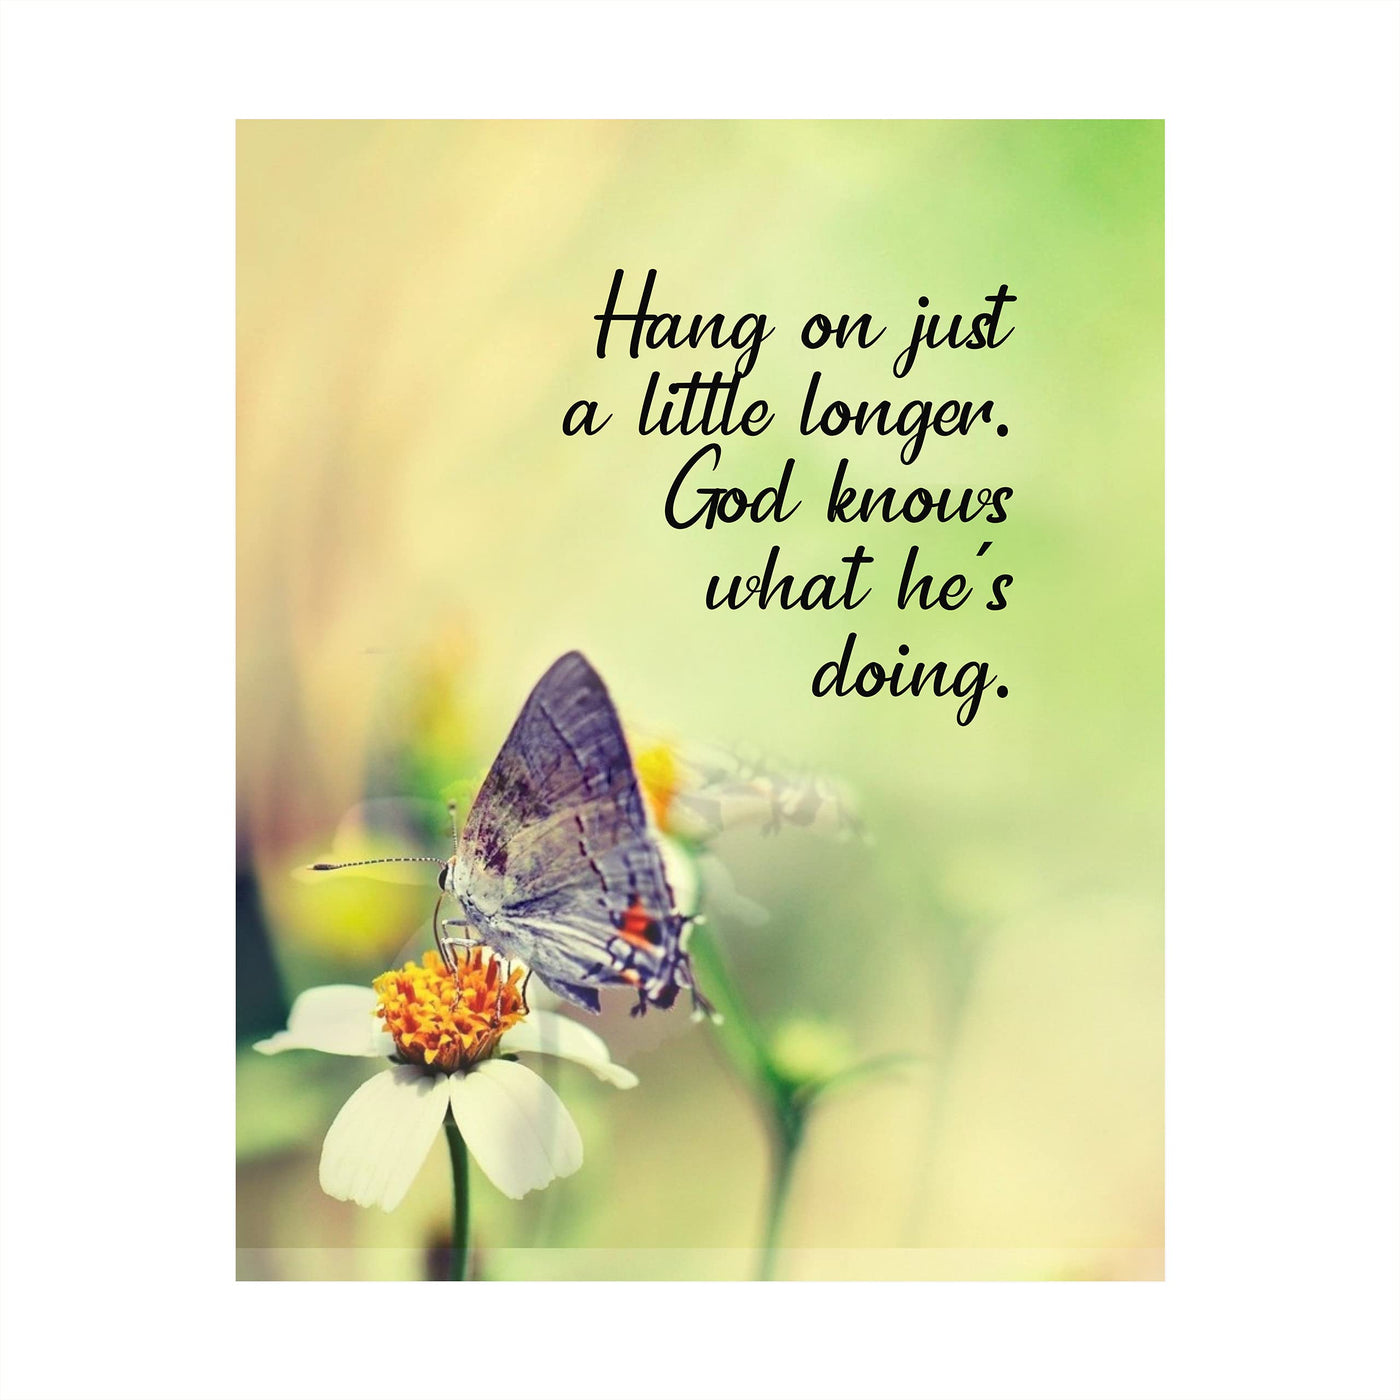 Hang On Just a Little Longer-God Knows What He Is Doing Inspirational Christian Wall Art -8 x 10" Floral Print w/Butterfly Image- Ready to Frame. Motivational Home-Office-Church Decor. Great Gift!